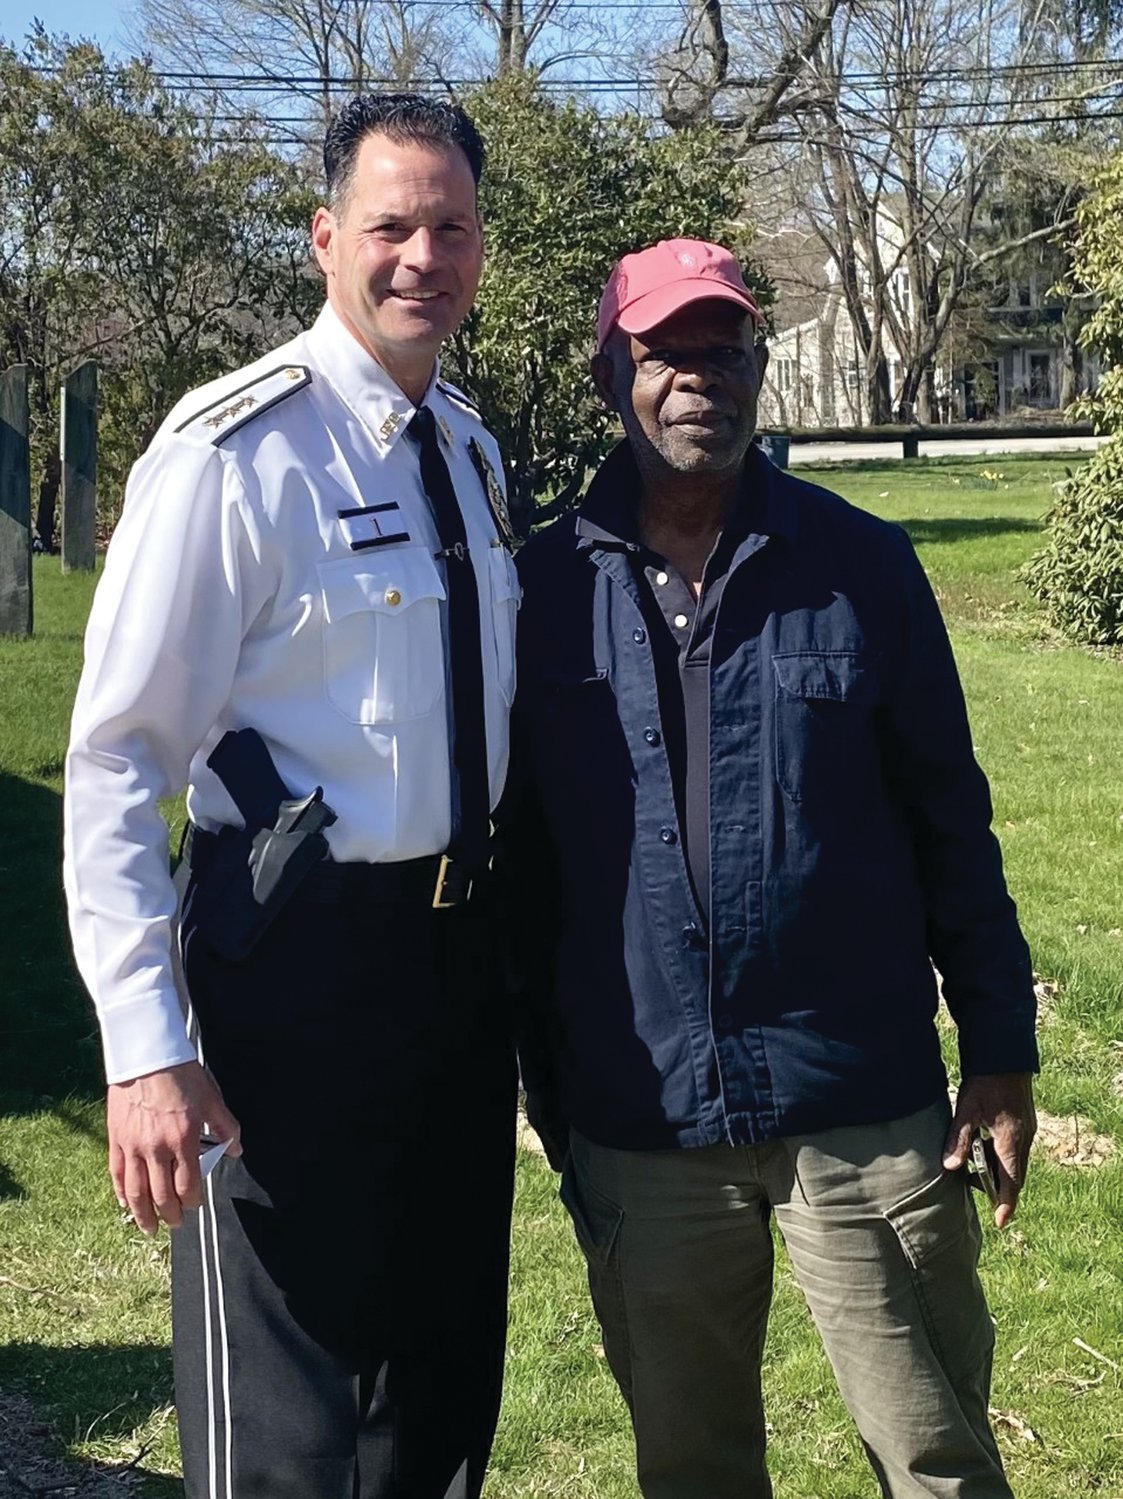 EARTH DAY: Johnston Police Chief Joseph Razza, right, visited the clean up efforts. He posed for a photo with Julius Kolawole, Executive Director of The African Alliance.